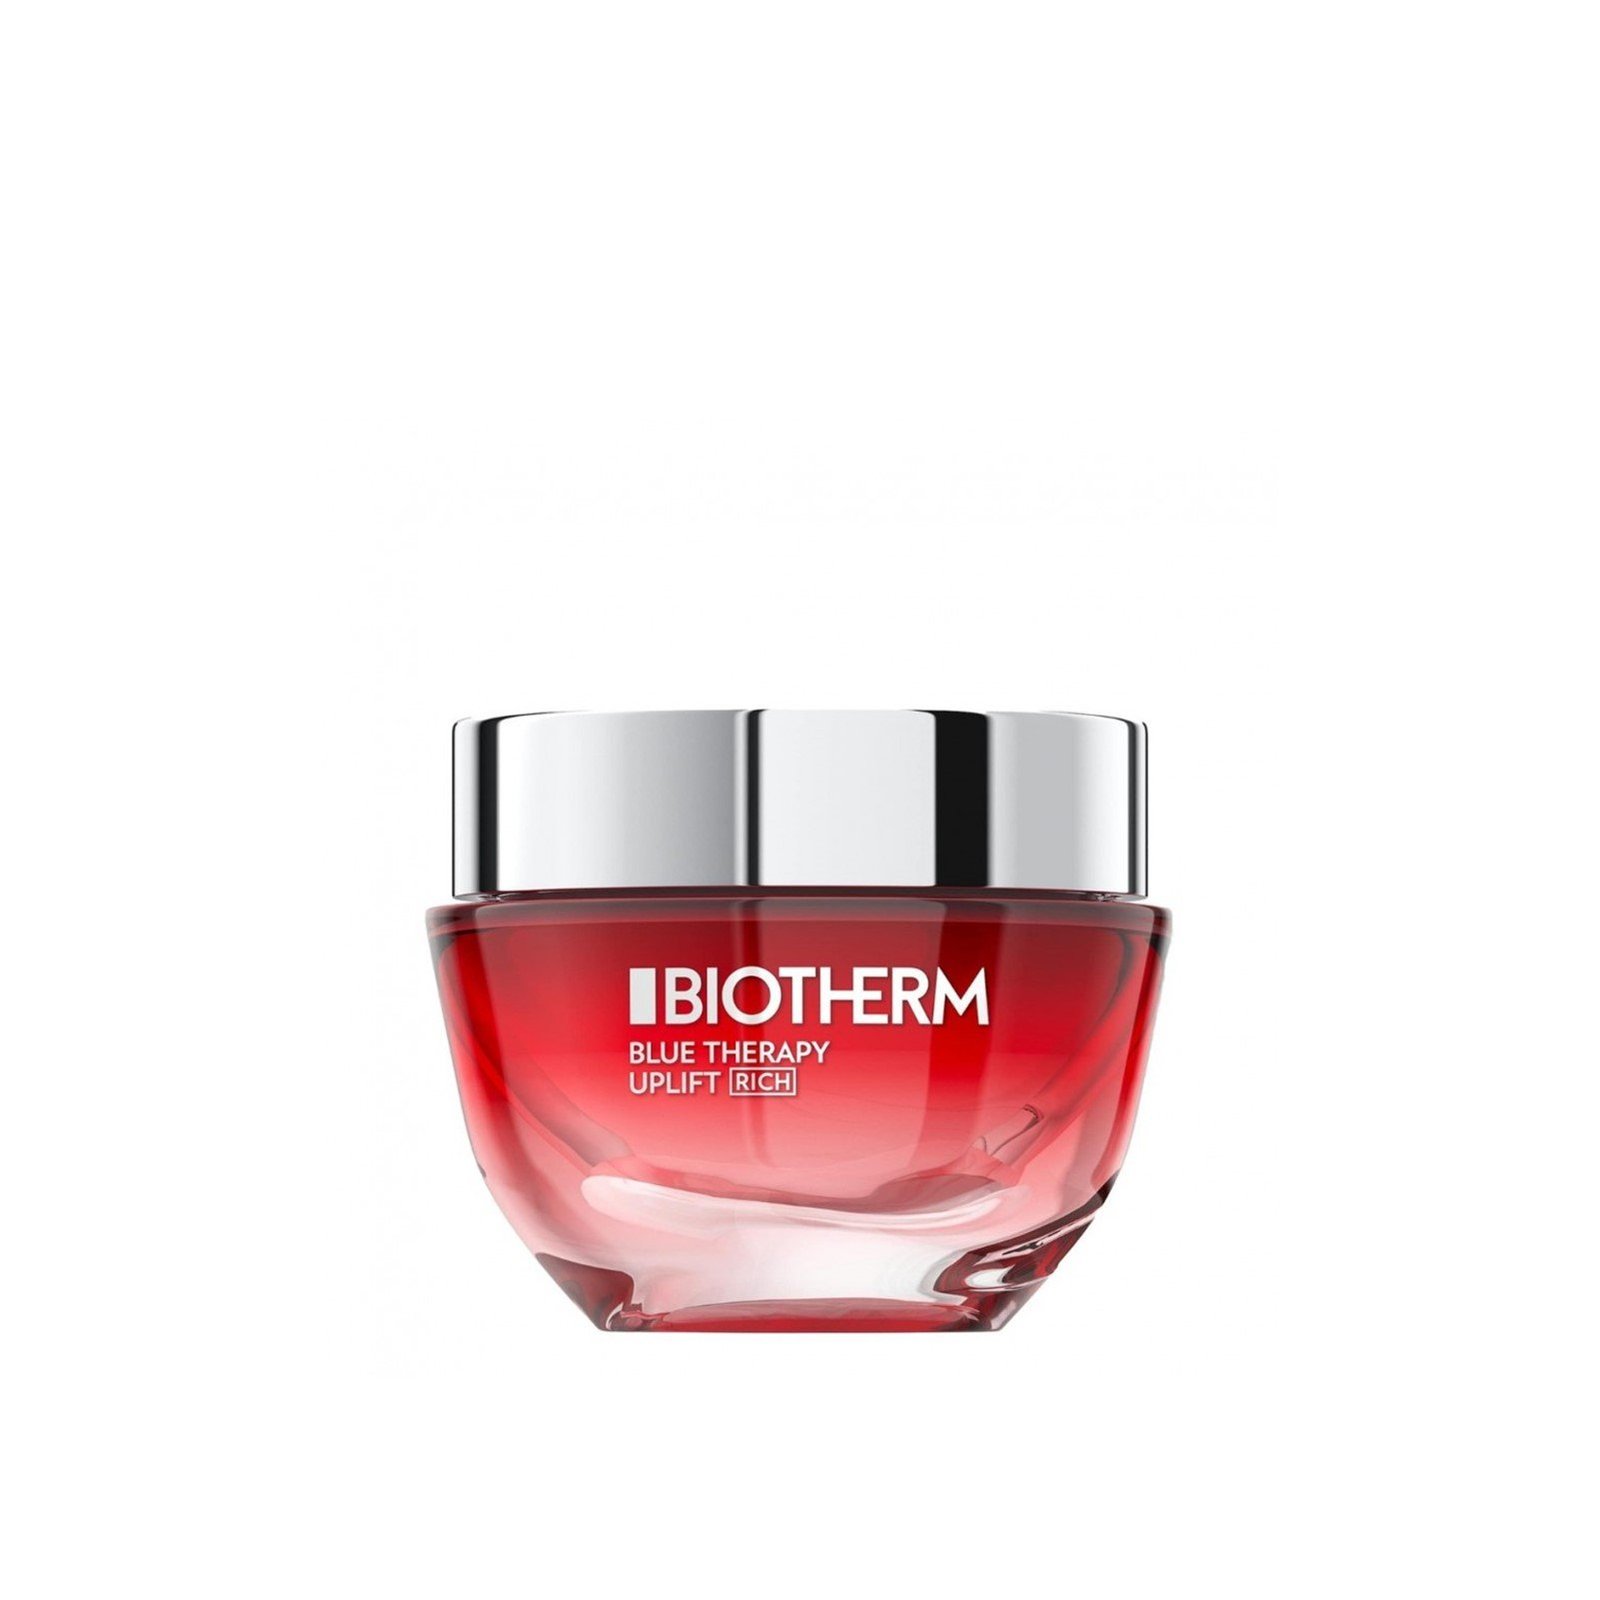 Biotherm Blue Therapy Uplift Rich Cream 50ml